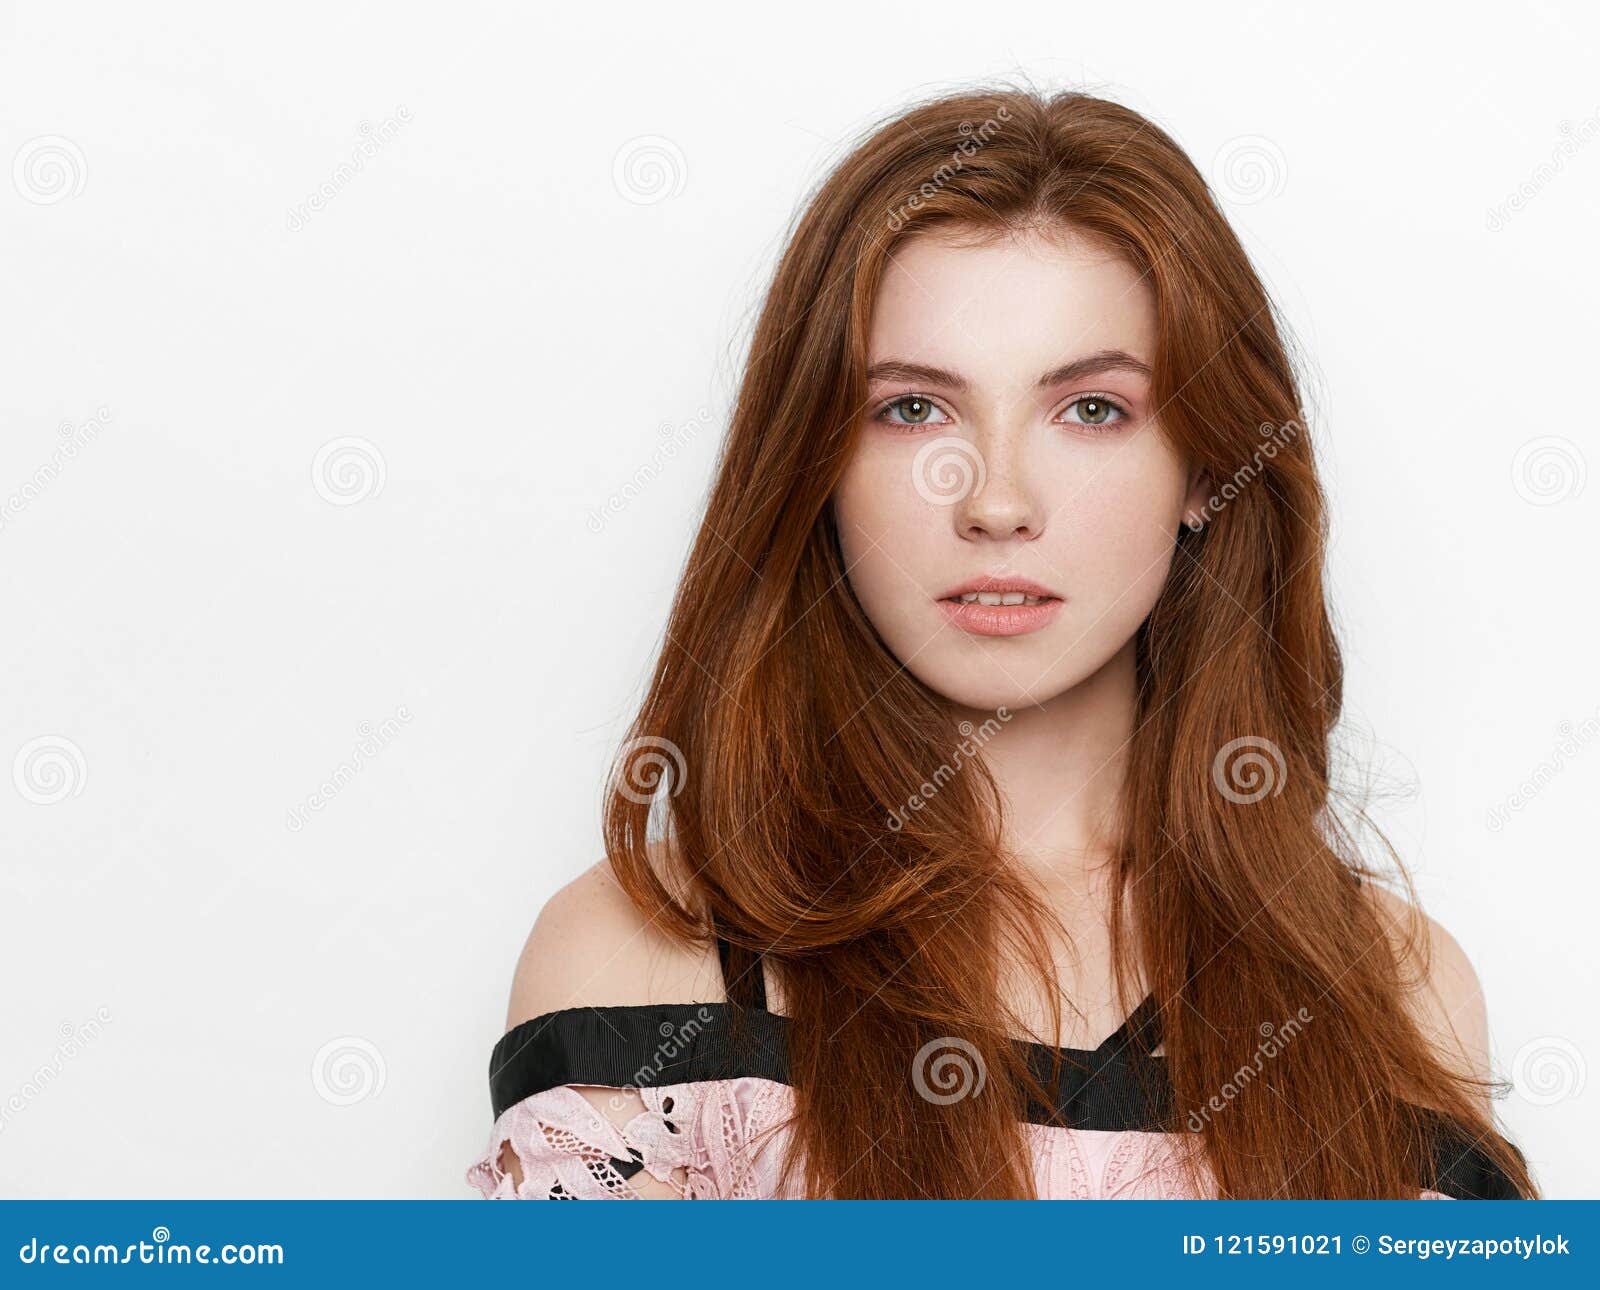 Young Beautiful Excited Lady with Gorgeous Natural Red Hair, Blank Copy ...